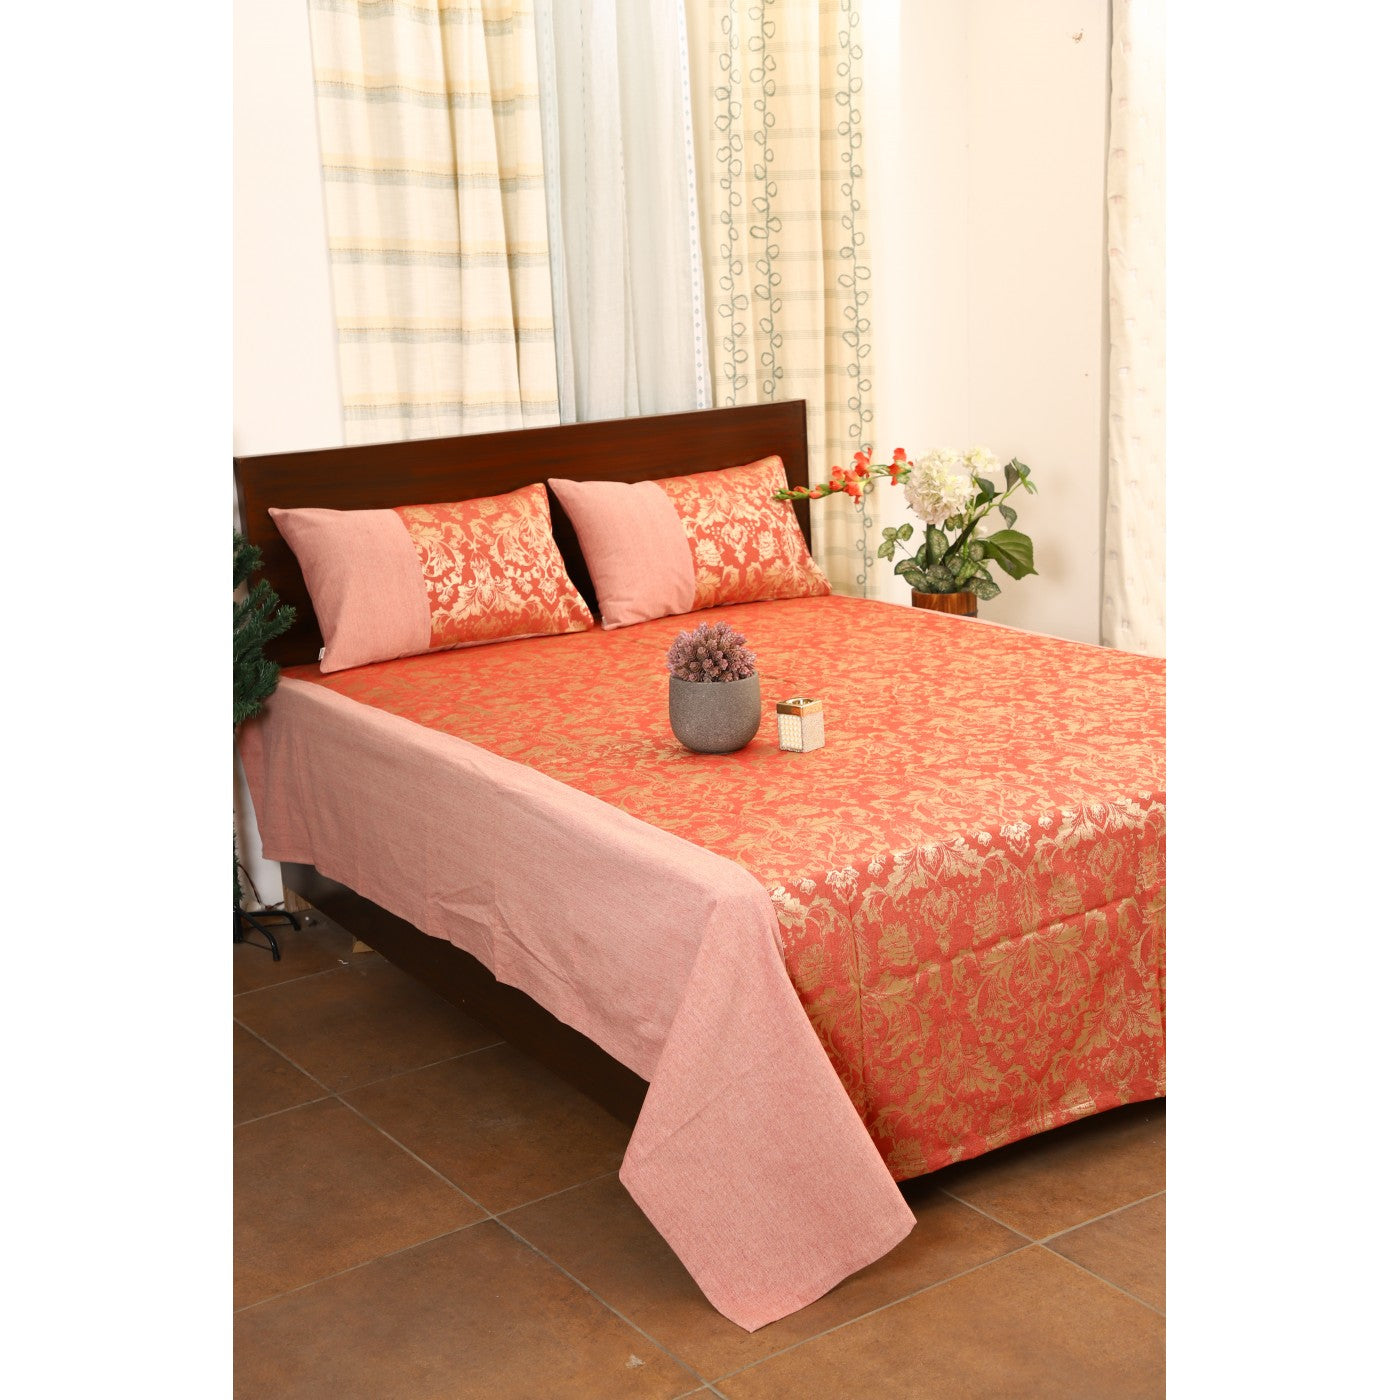 Elegant Fiore Jacquard Double Bed Cover Set with Matching Pillow Covers